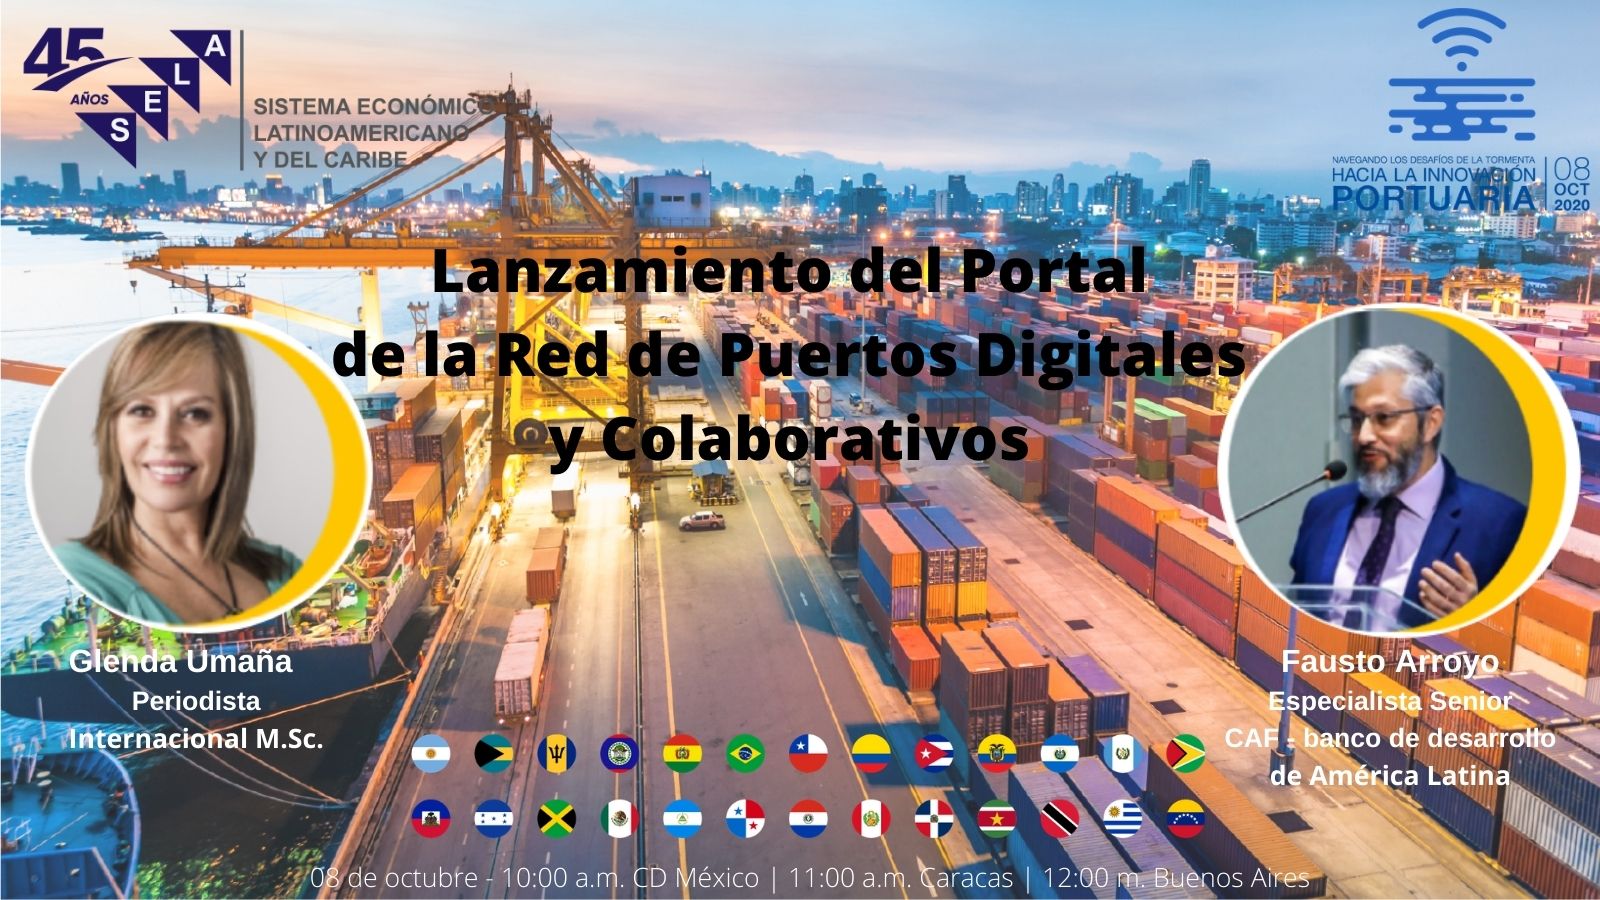 SELA launches new Web site to boost port digitization of Latin America and the Caribbean